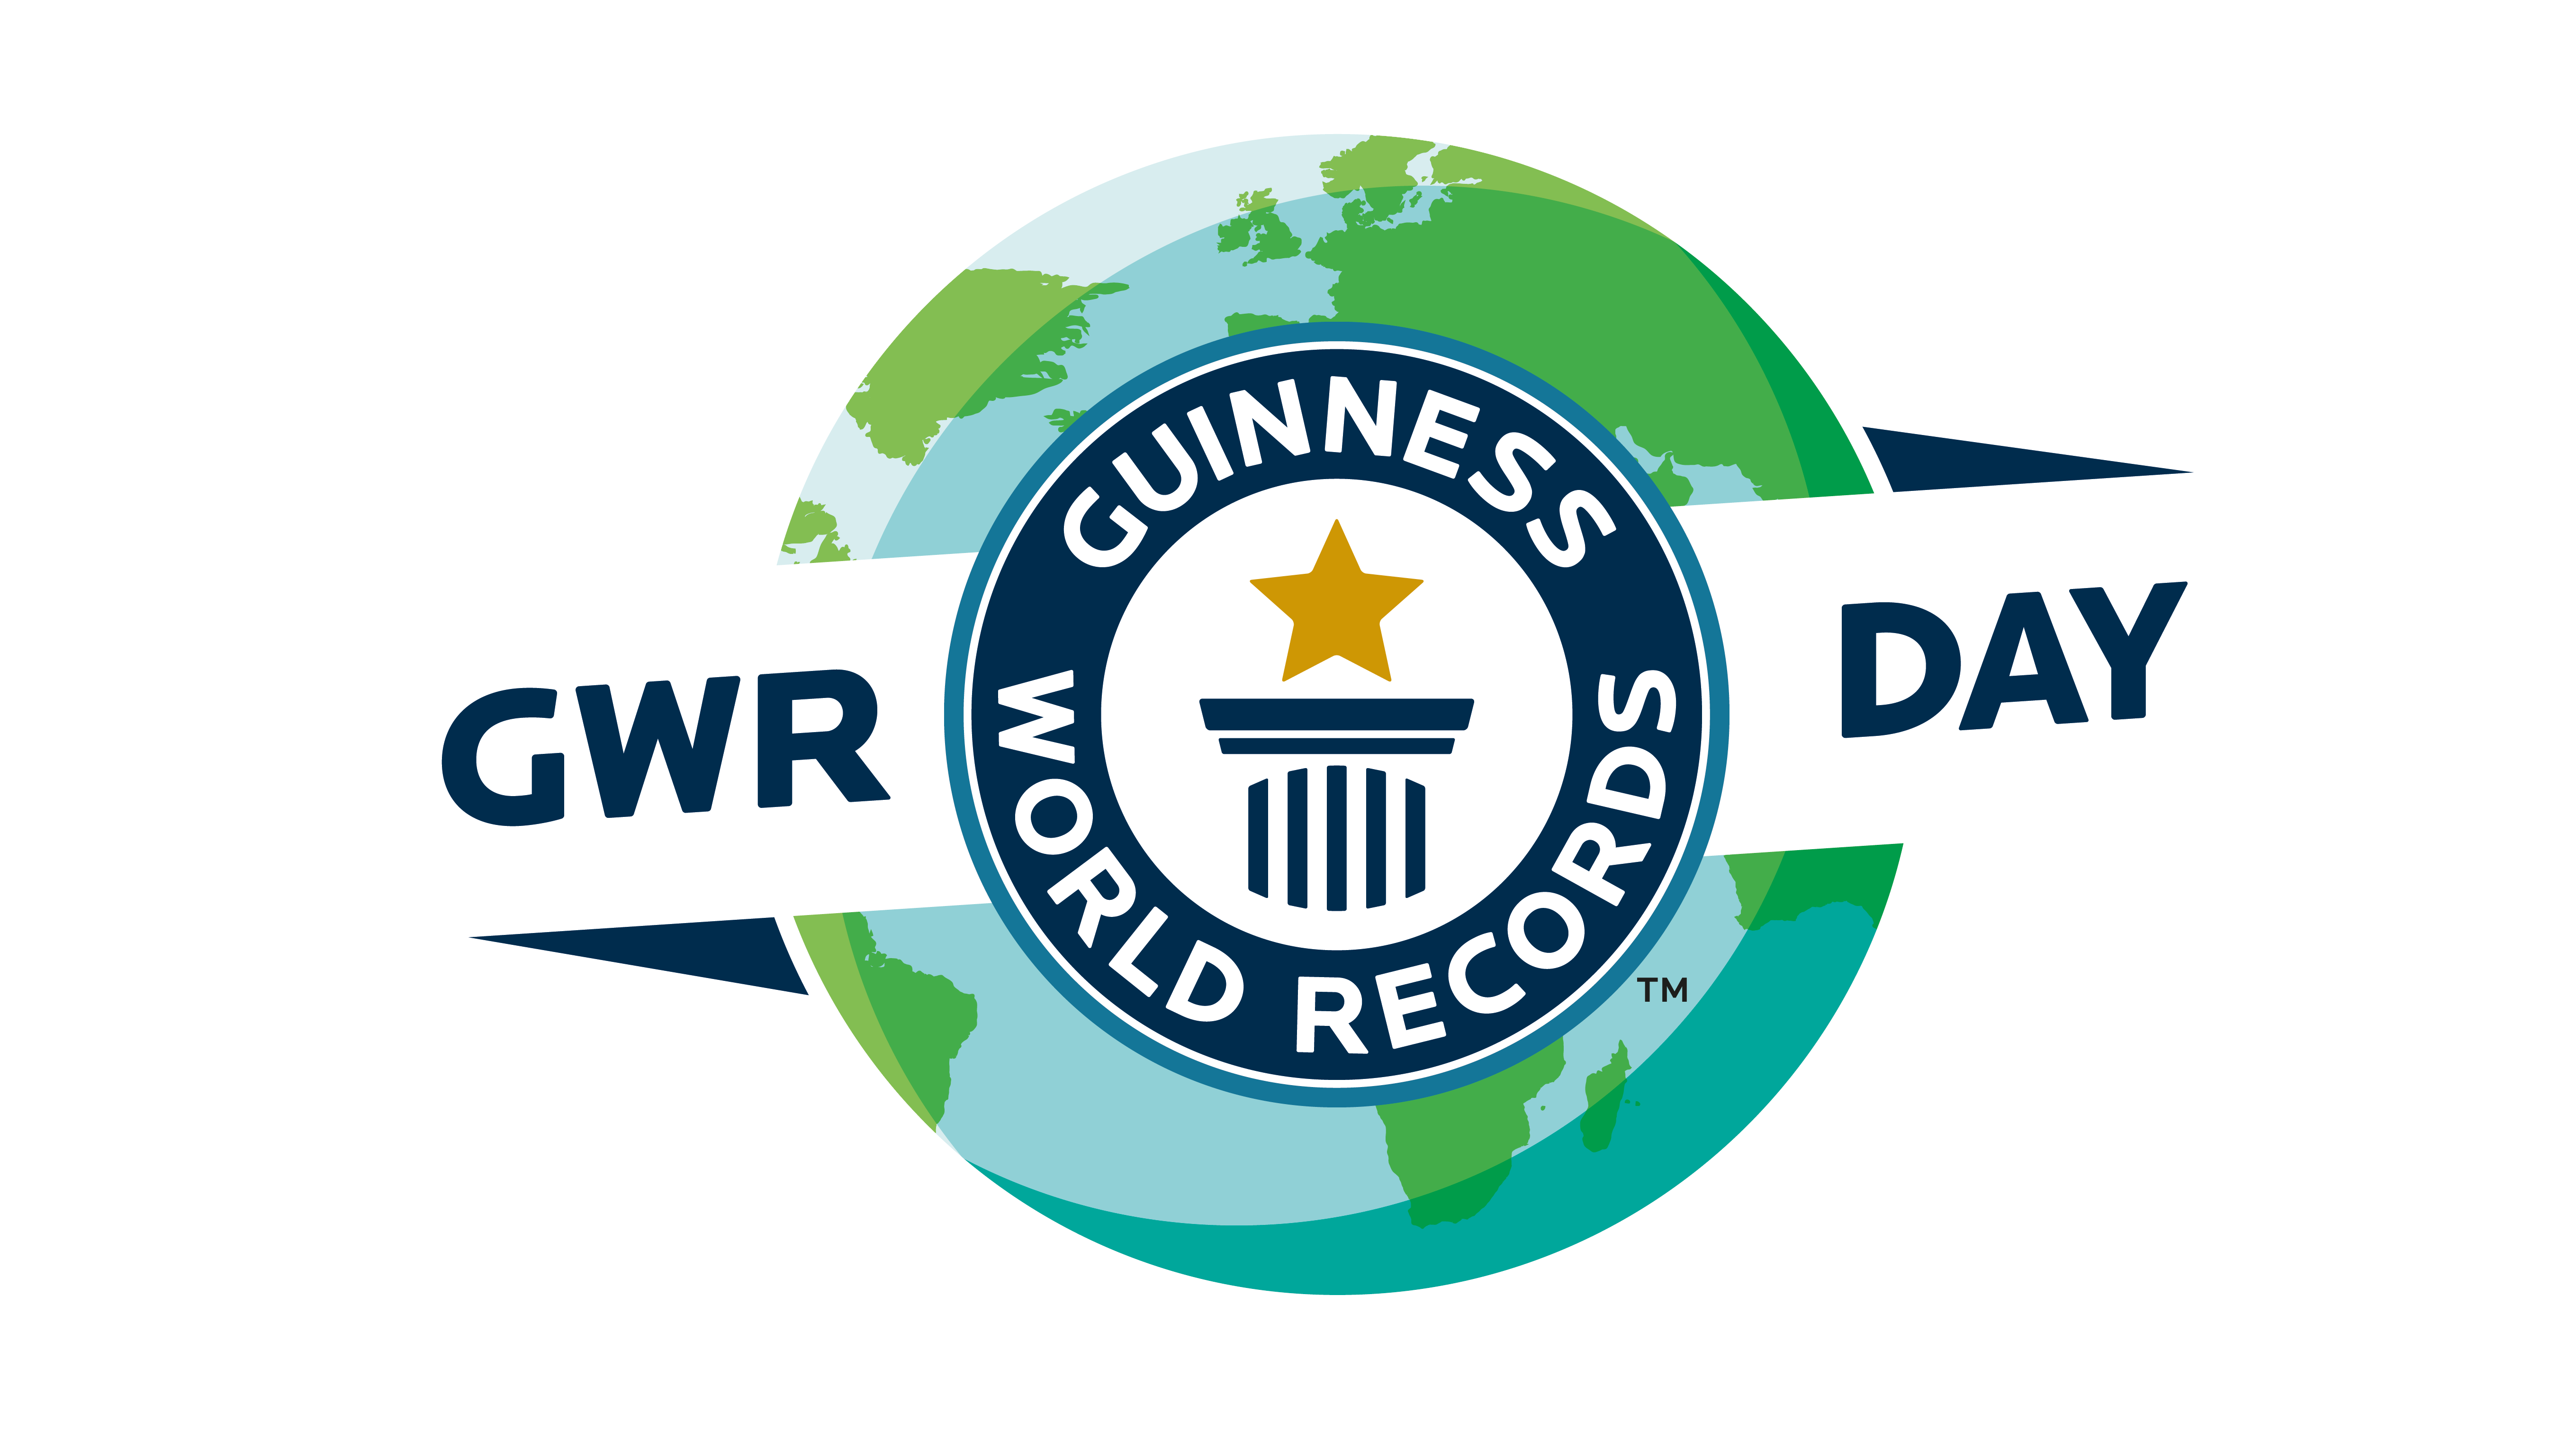 Guinness World Record Logo PNG Image in High Definition pngteam.com